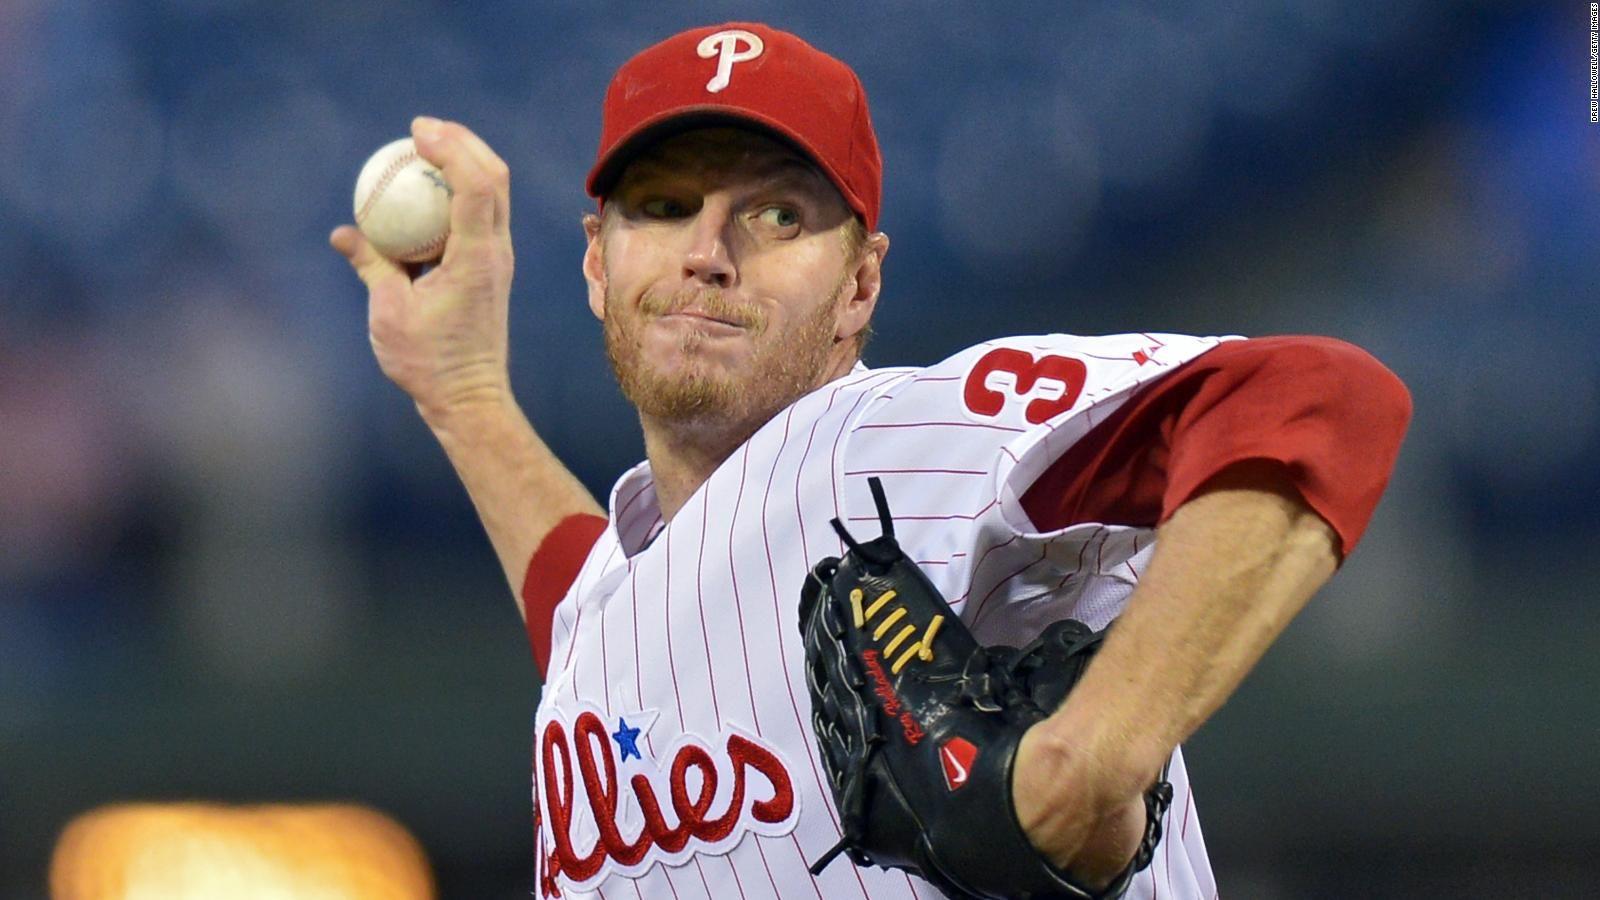 Roy Halladay Wallpapers - Wallpaper Cave